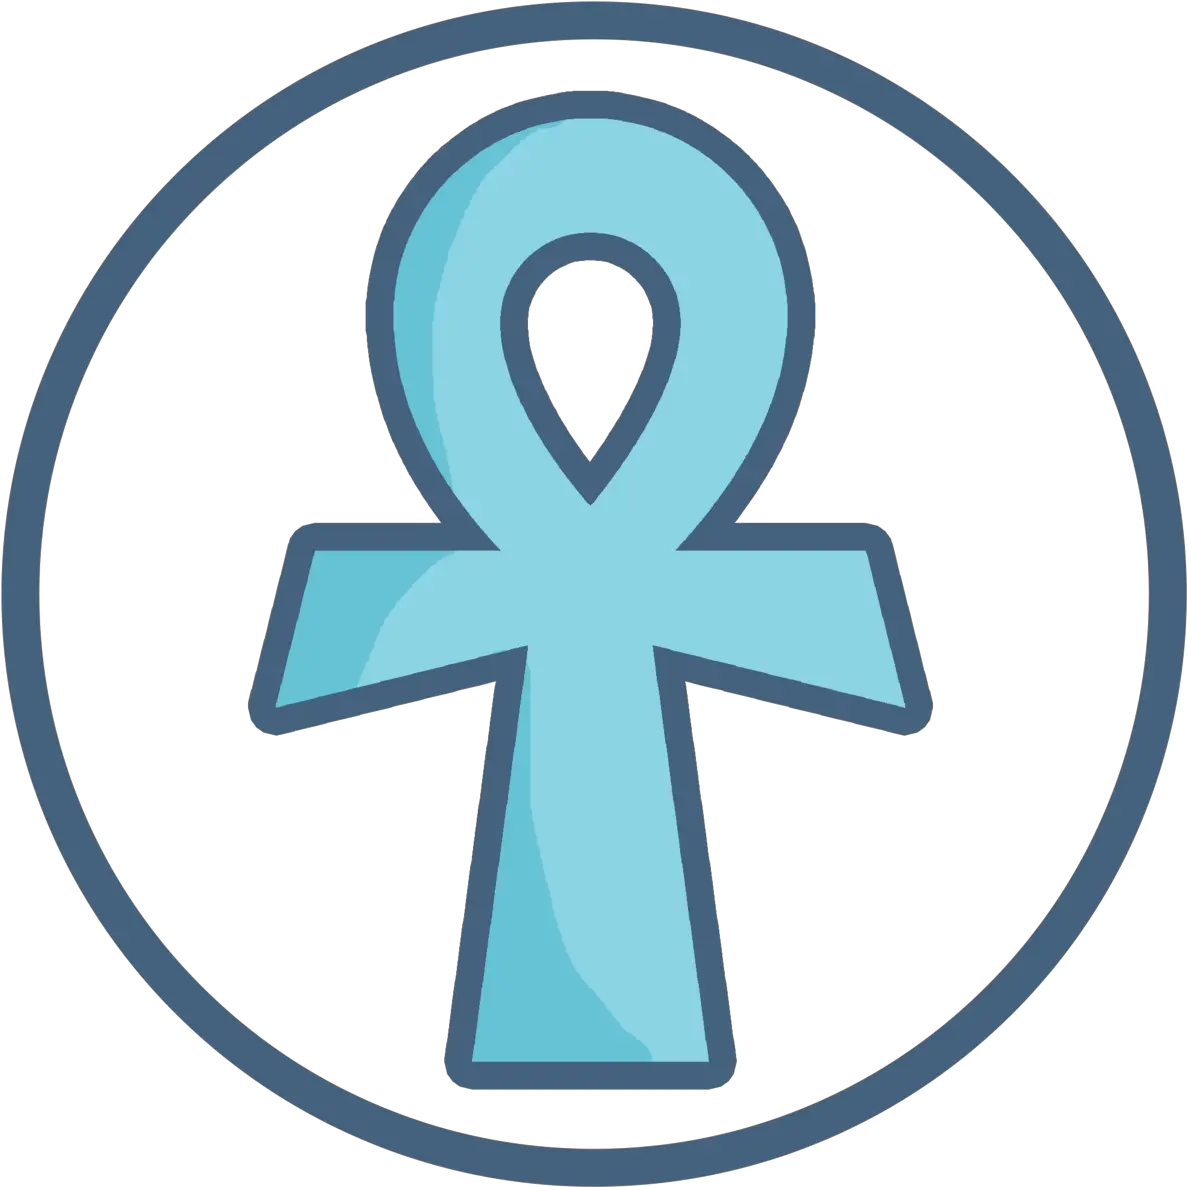 Download Hd Ankh Transparent Png Image Ankh Ankh Png